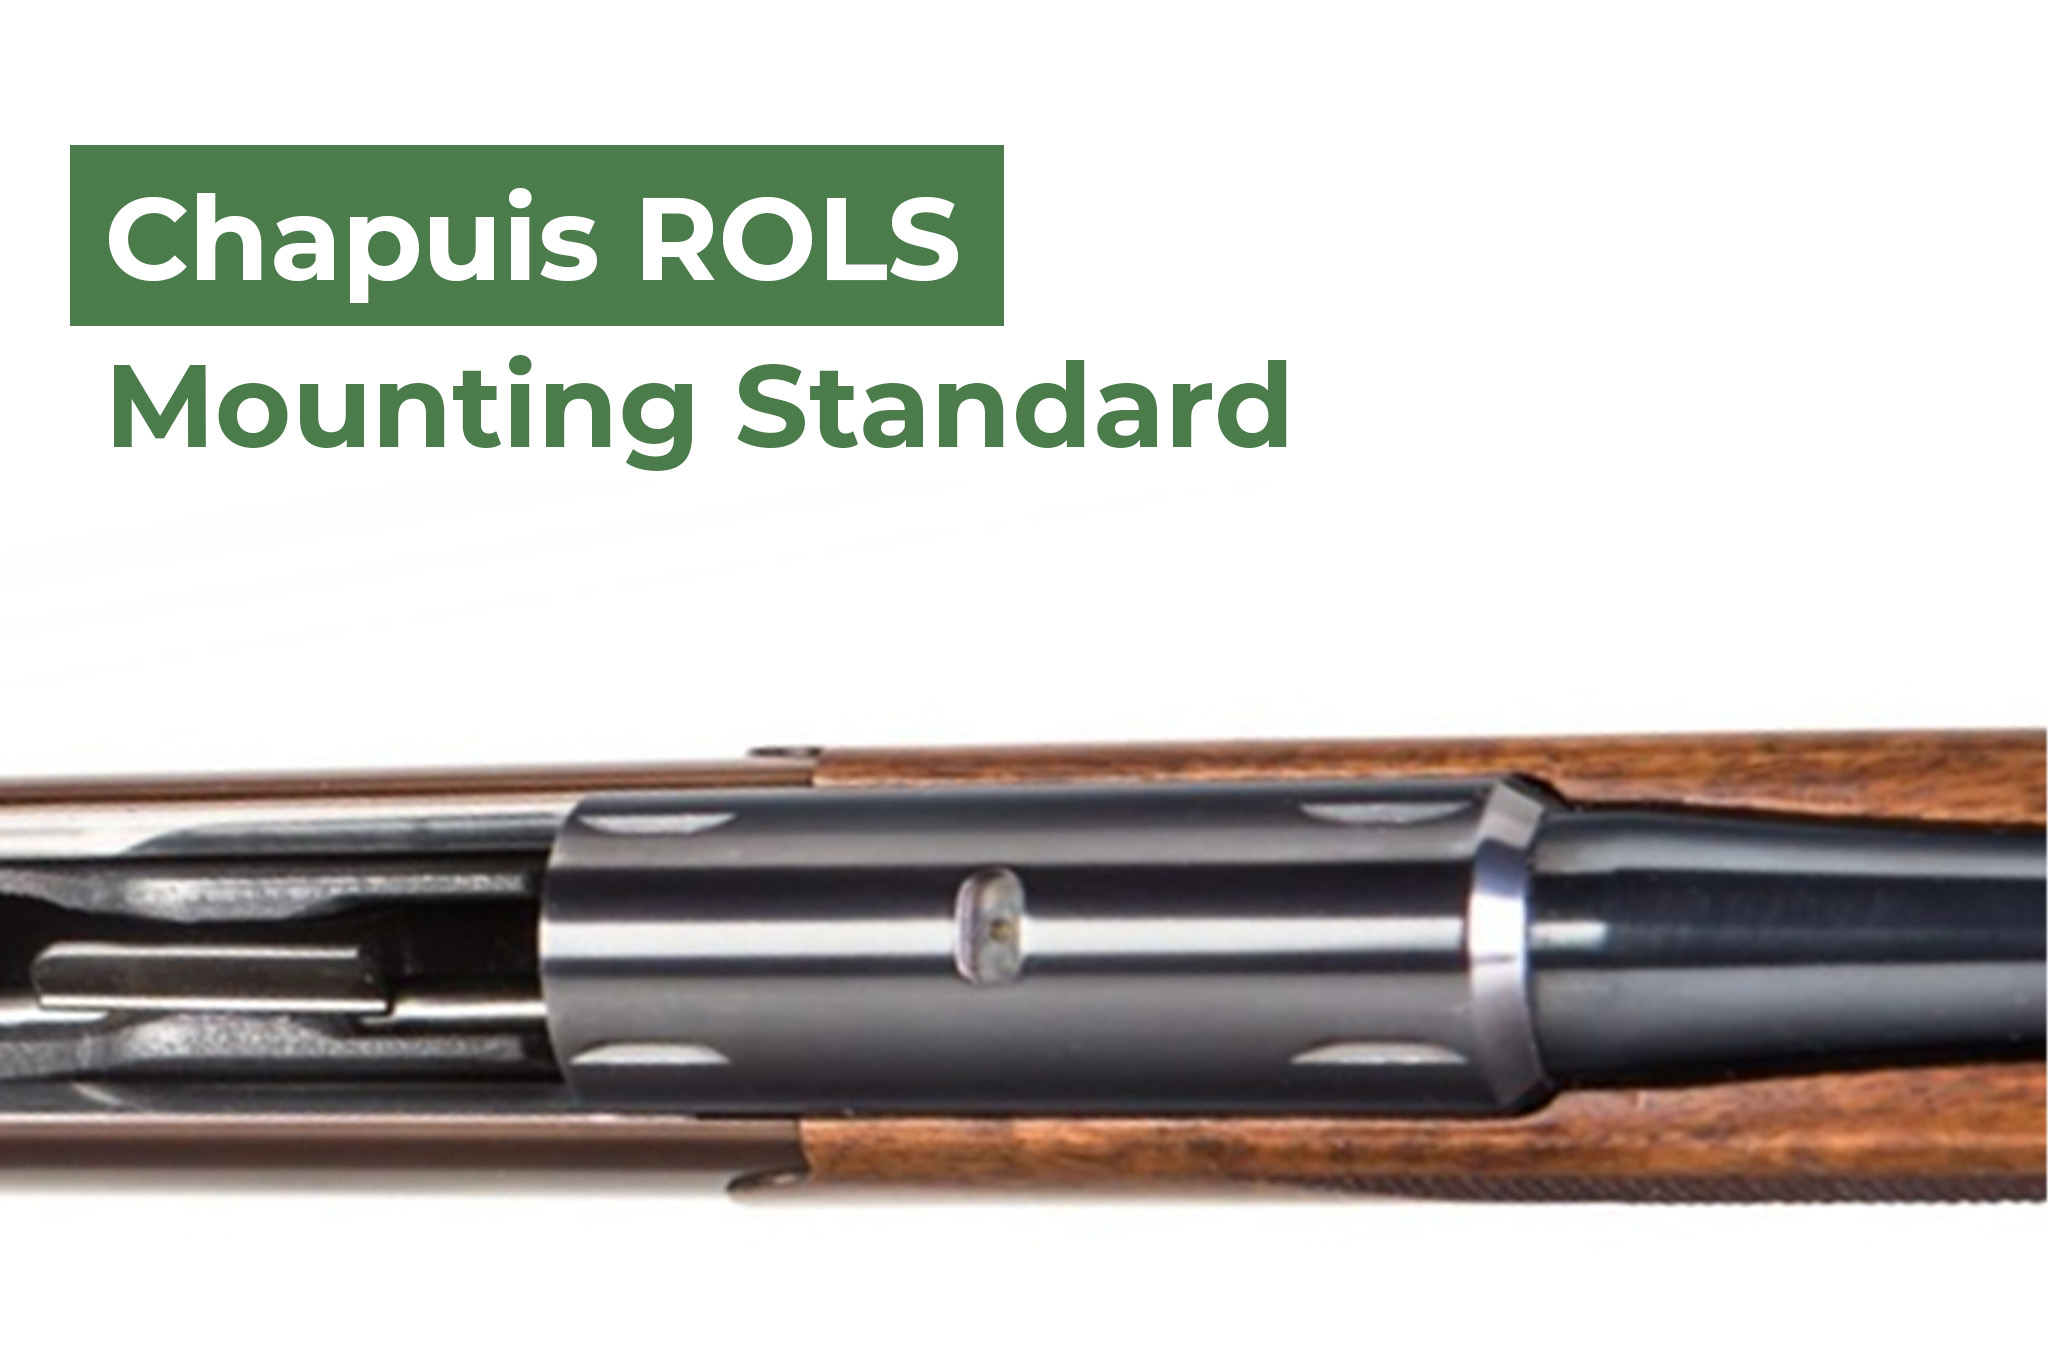 Rifles With Chapuis ROLS Mounting Surface